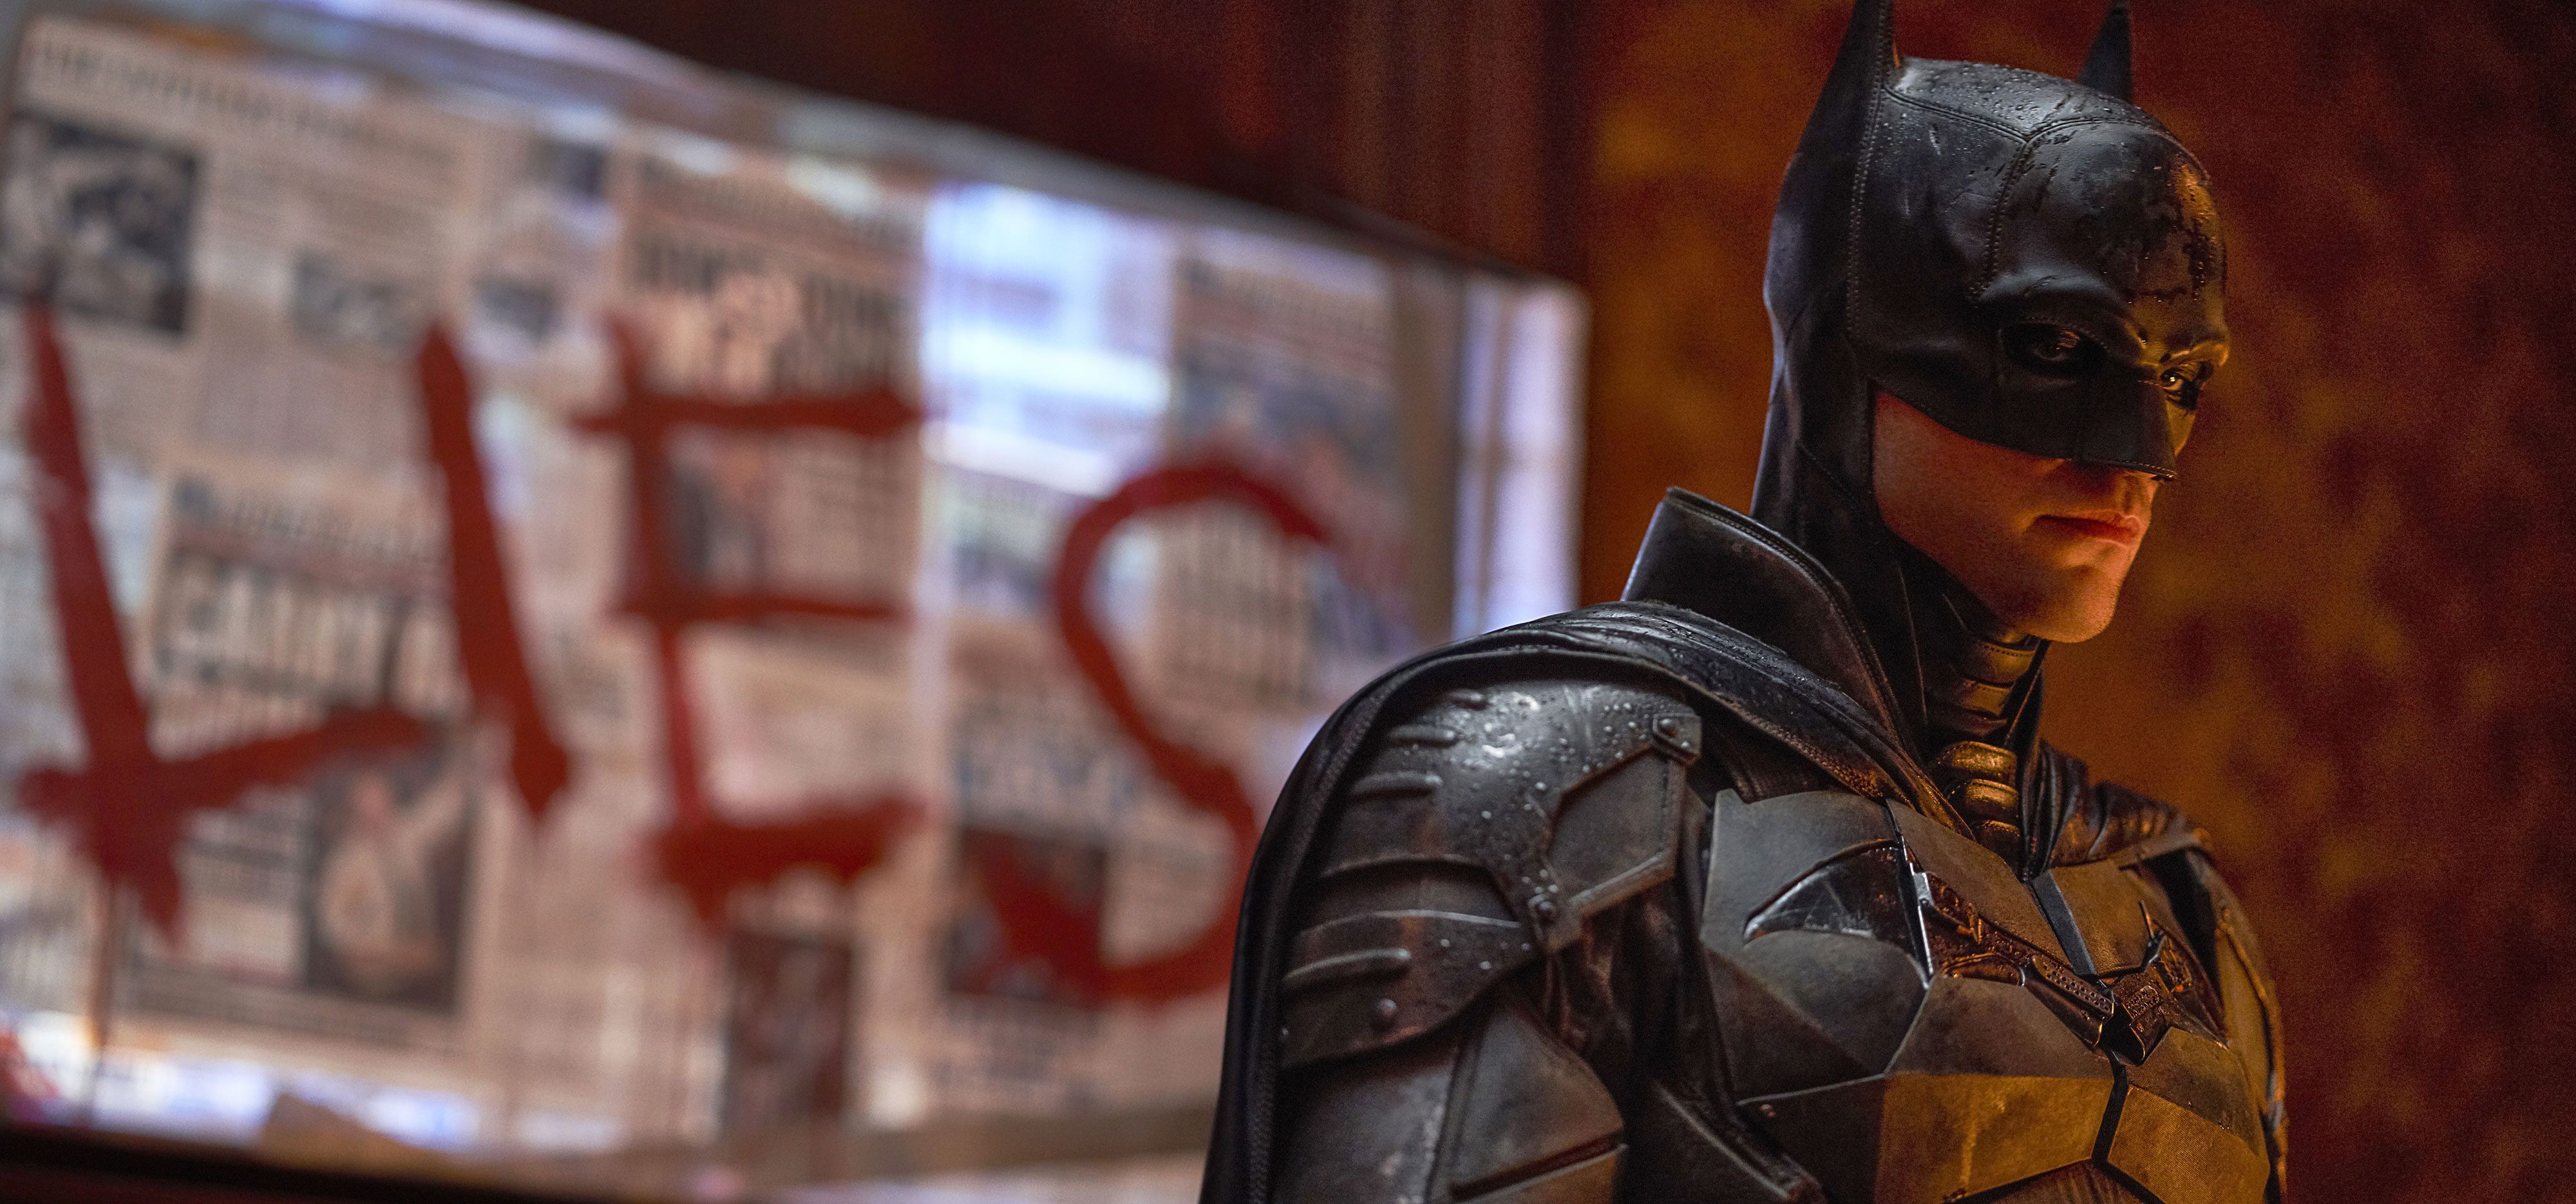 Longtime Batman Voice to Play Him in Live-Action For First Time